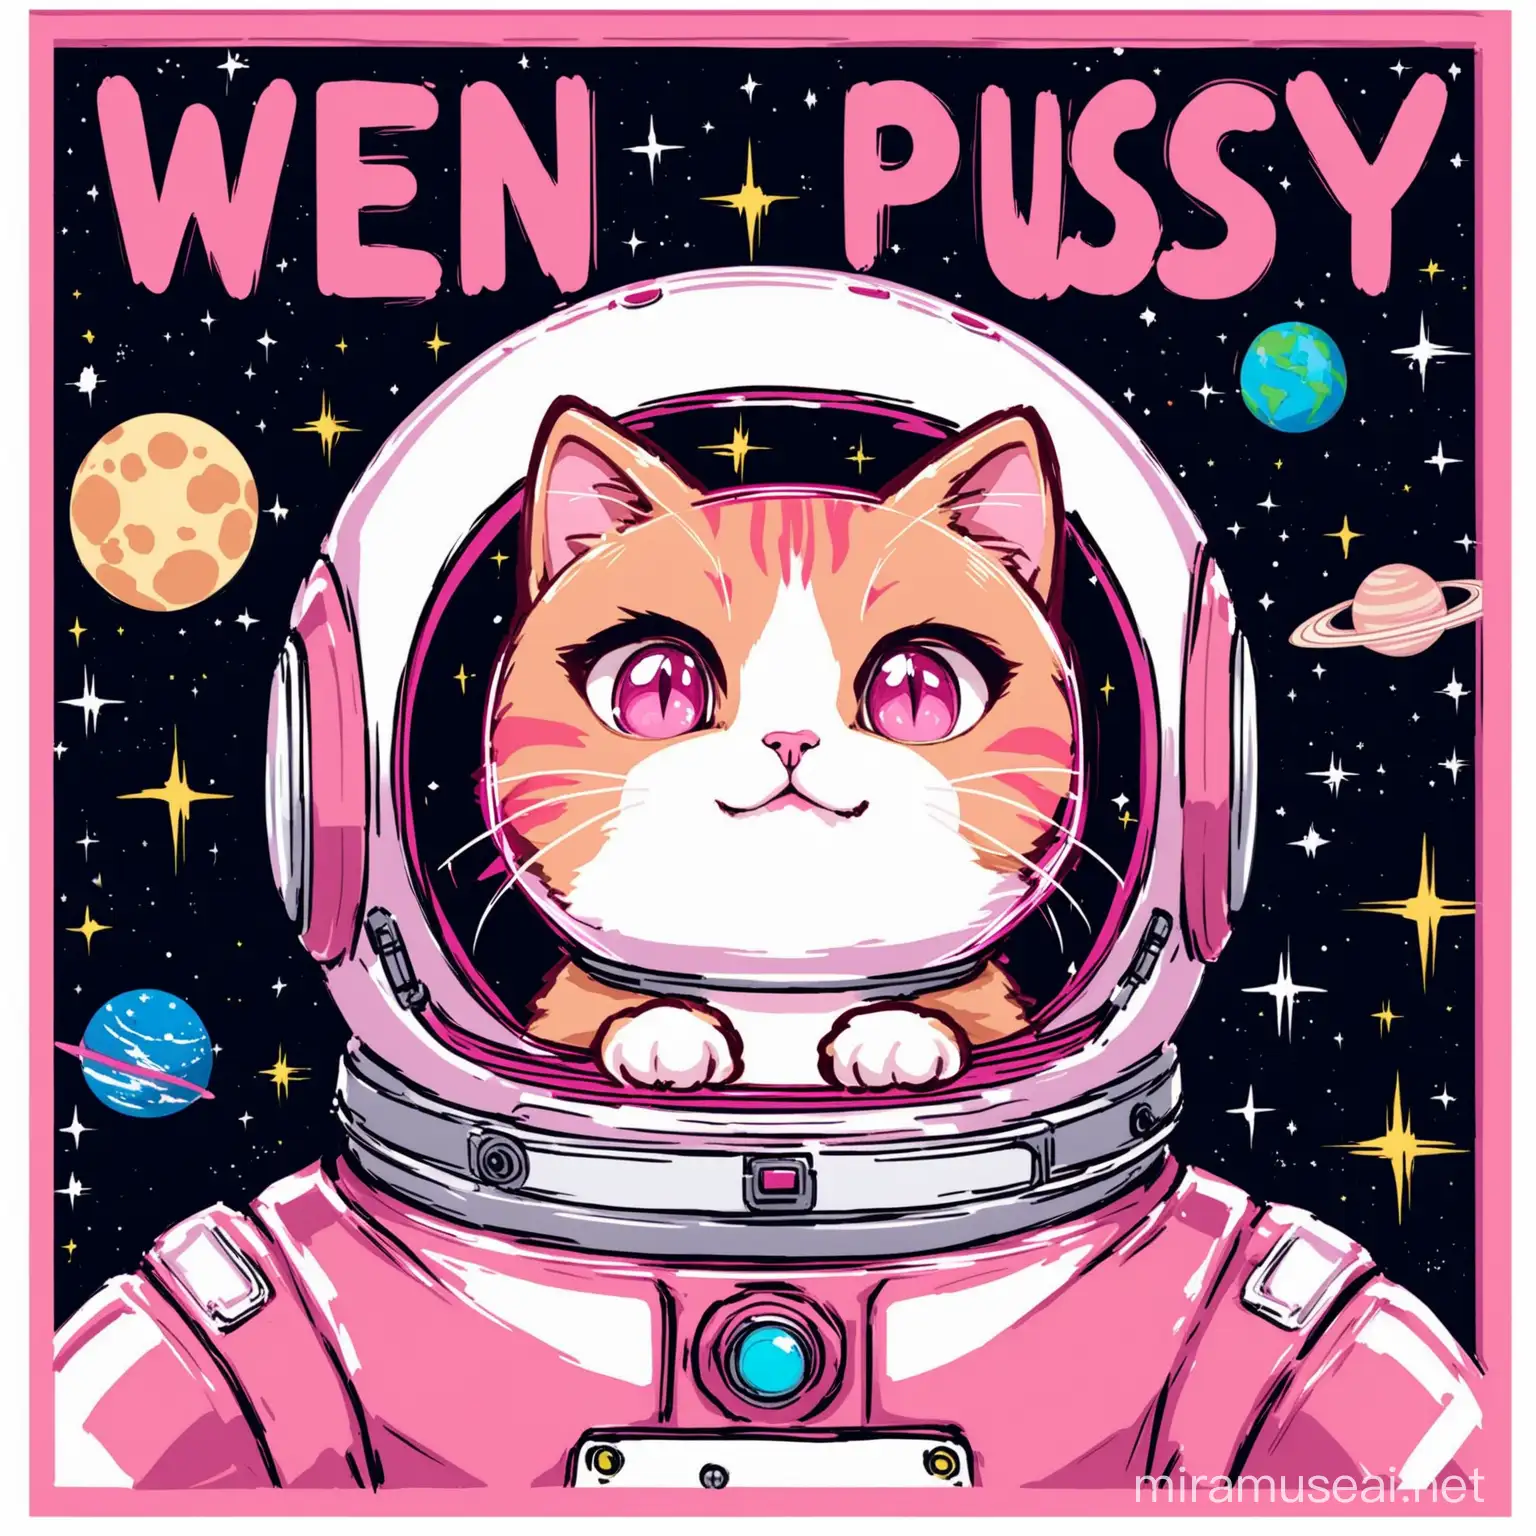 Photo of PINK CARTOON CAT in a space helmet saying "wen pussY"